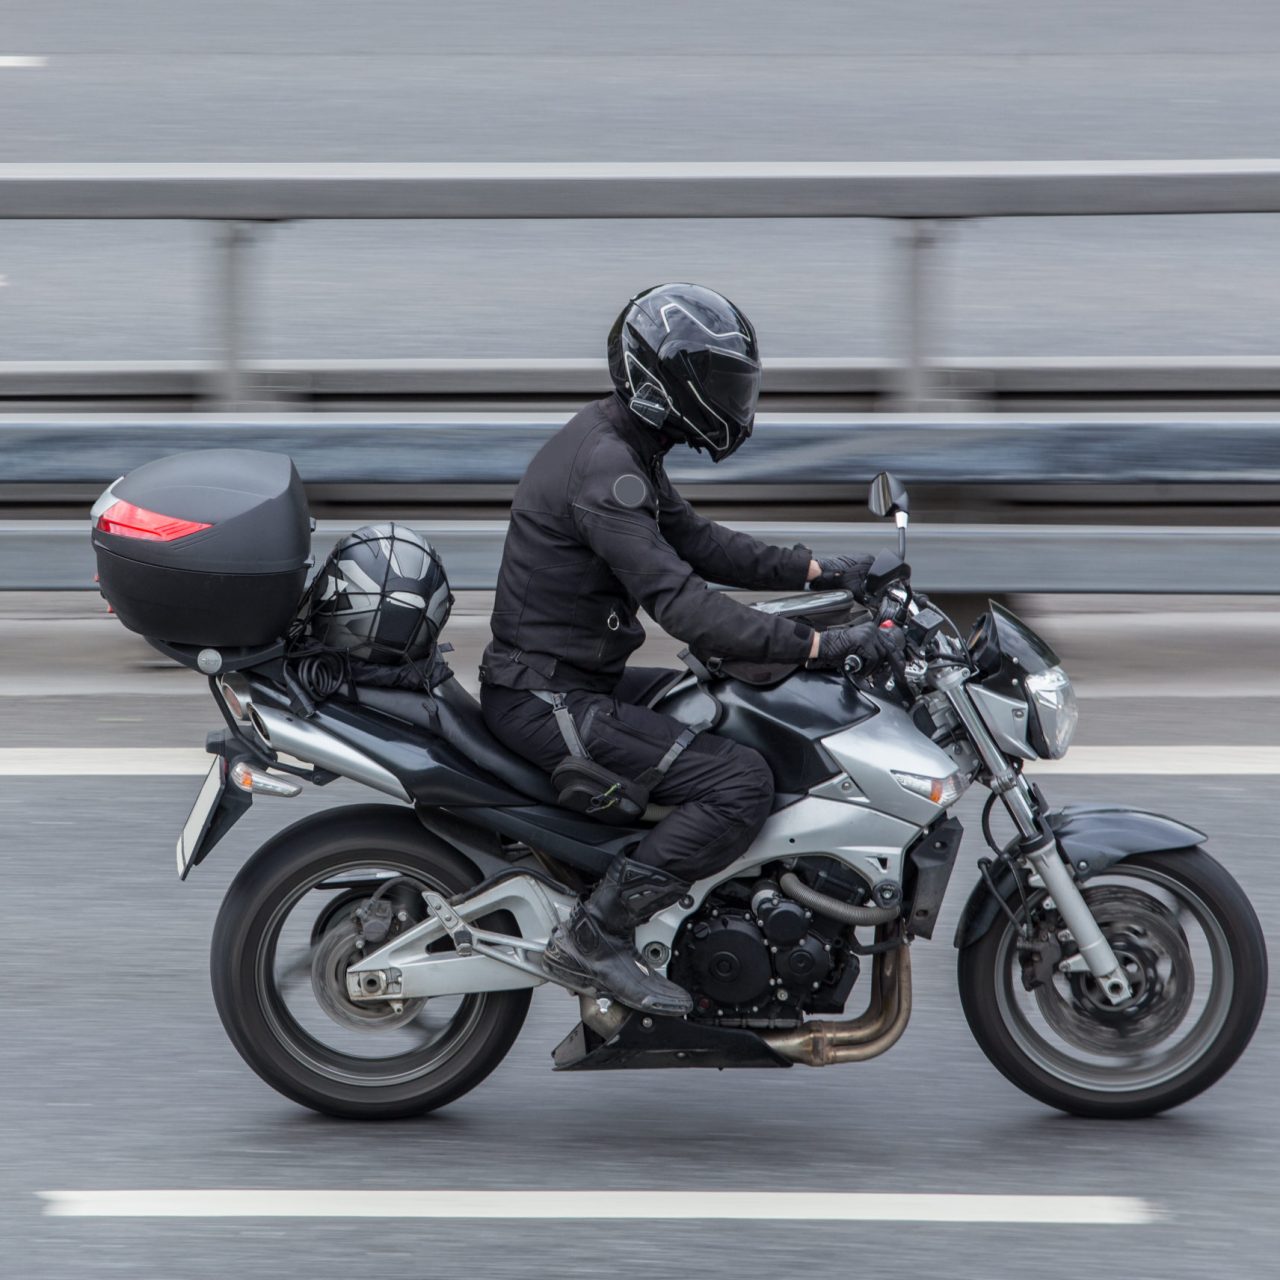 Motorcyclist in a helmet rides a motorcycle on the road. Motion blur.